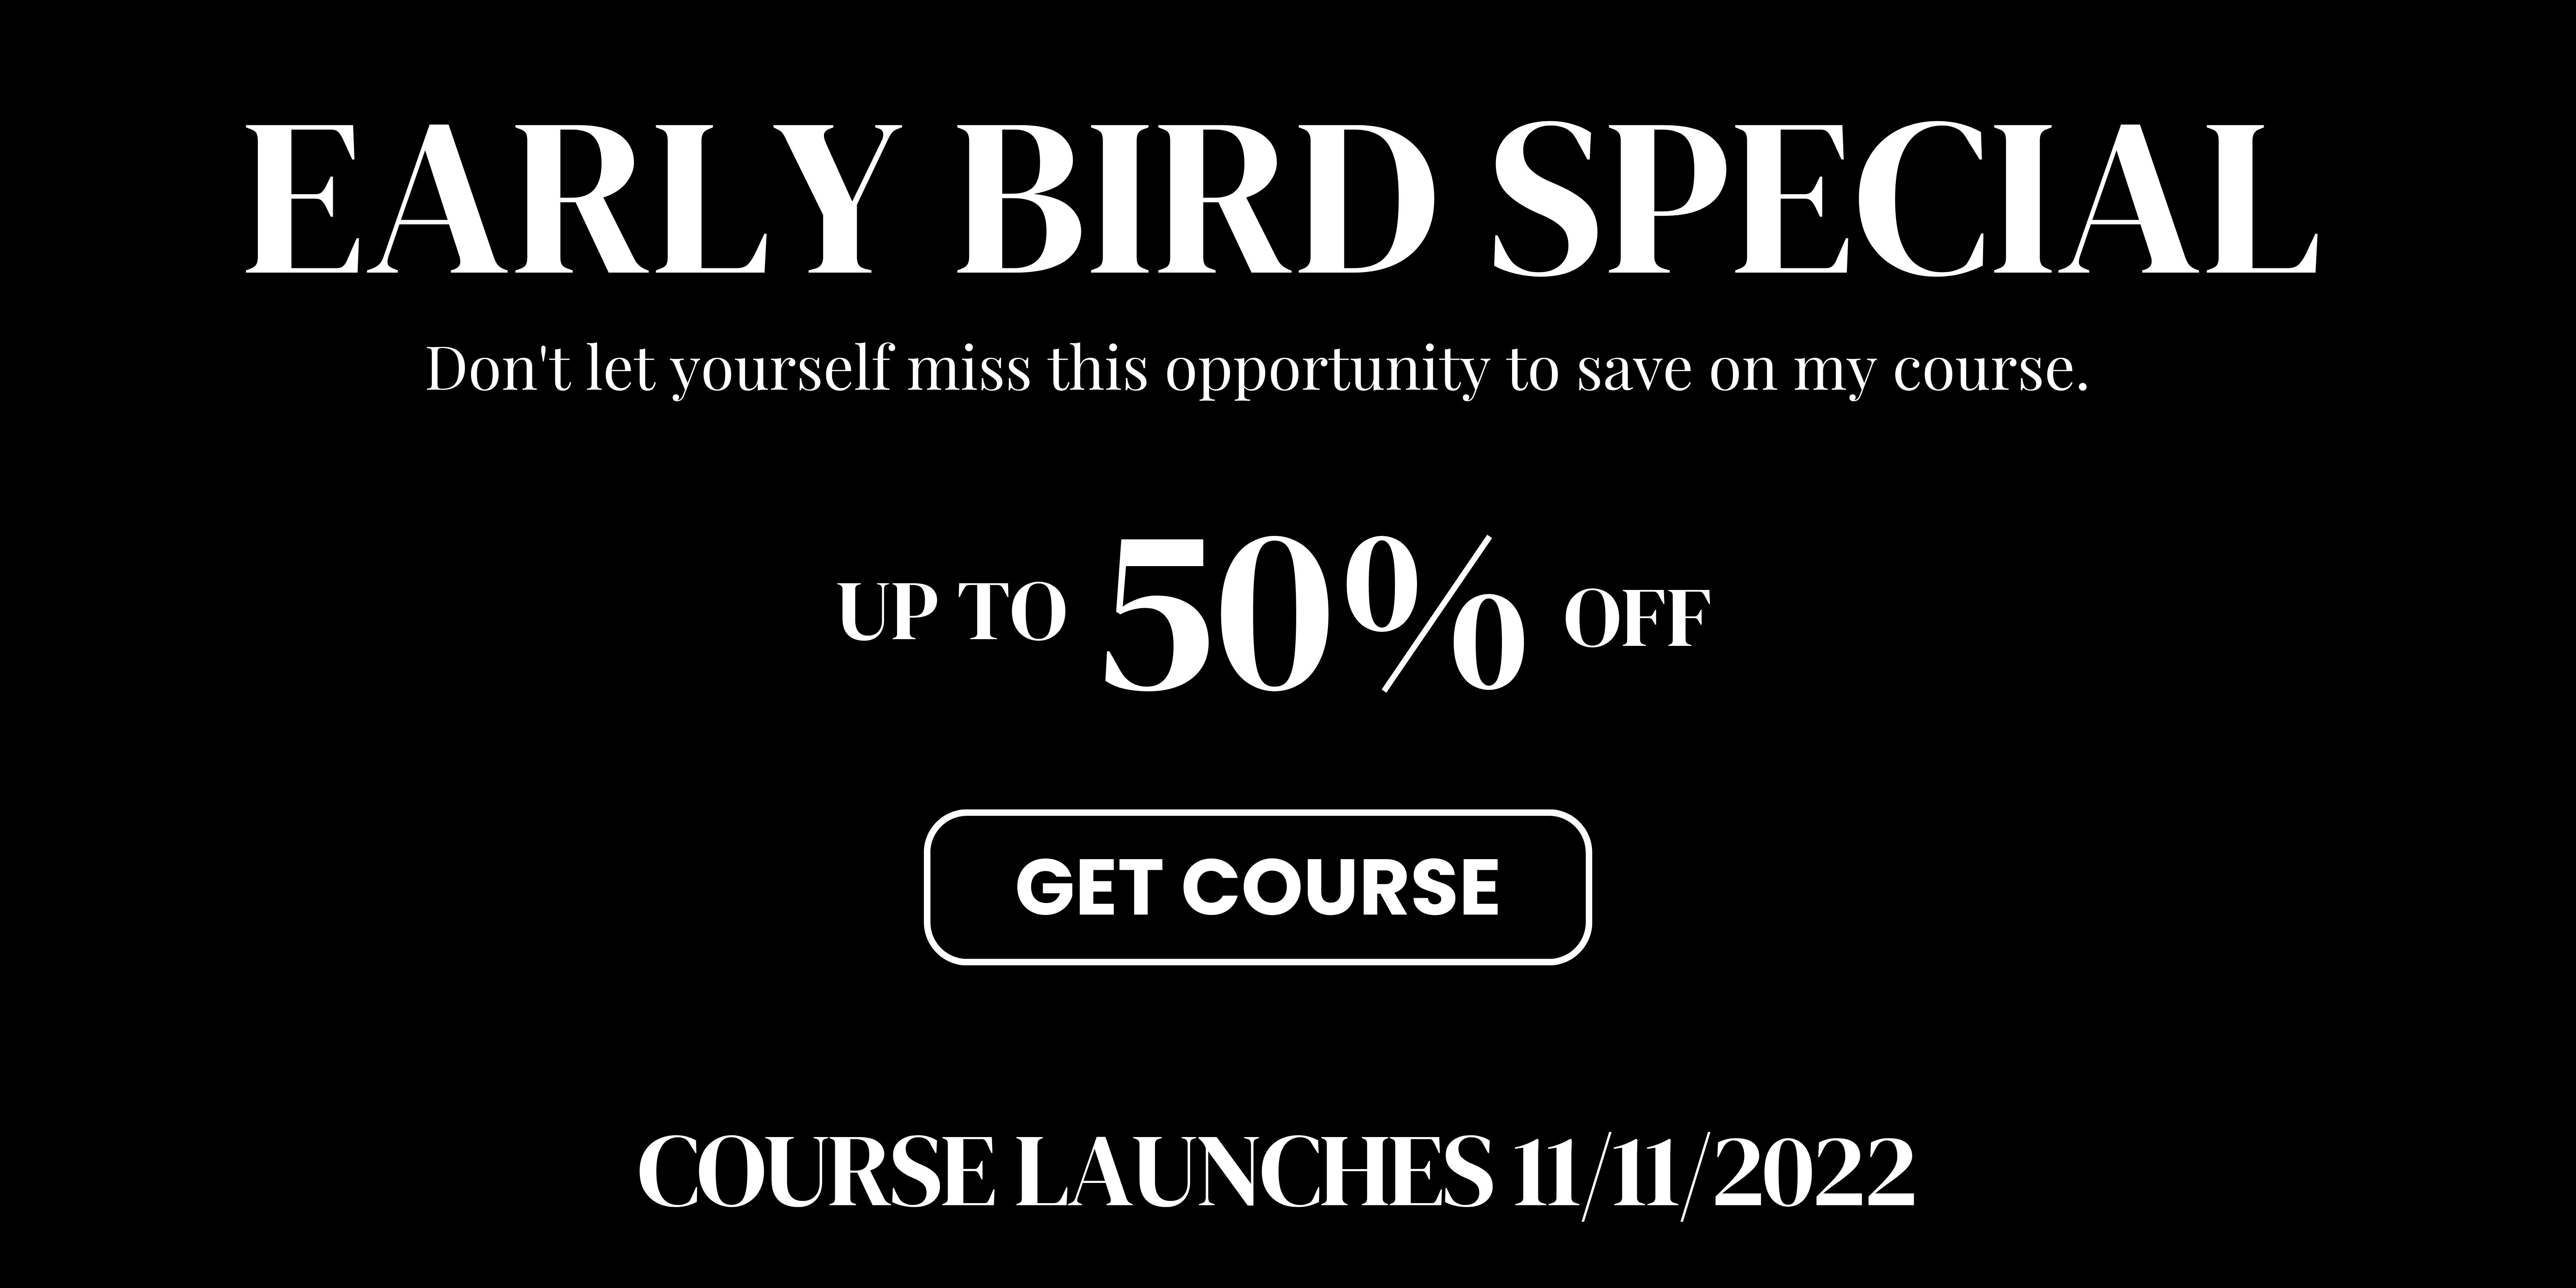 Early Bird Special Buy Course Now and Save